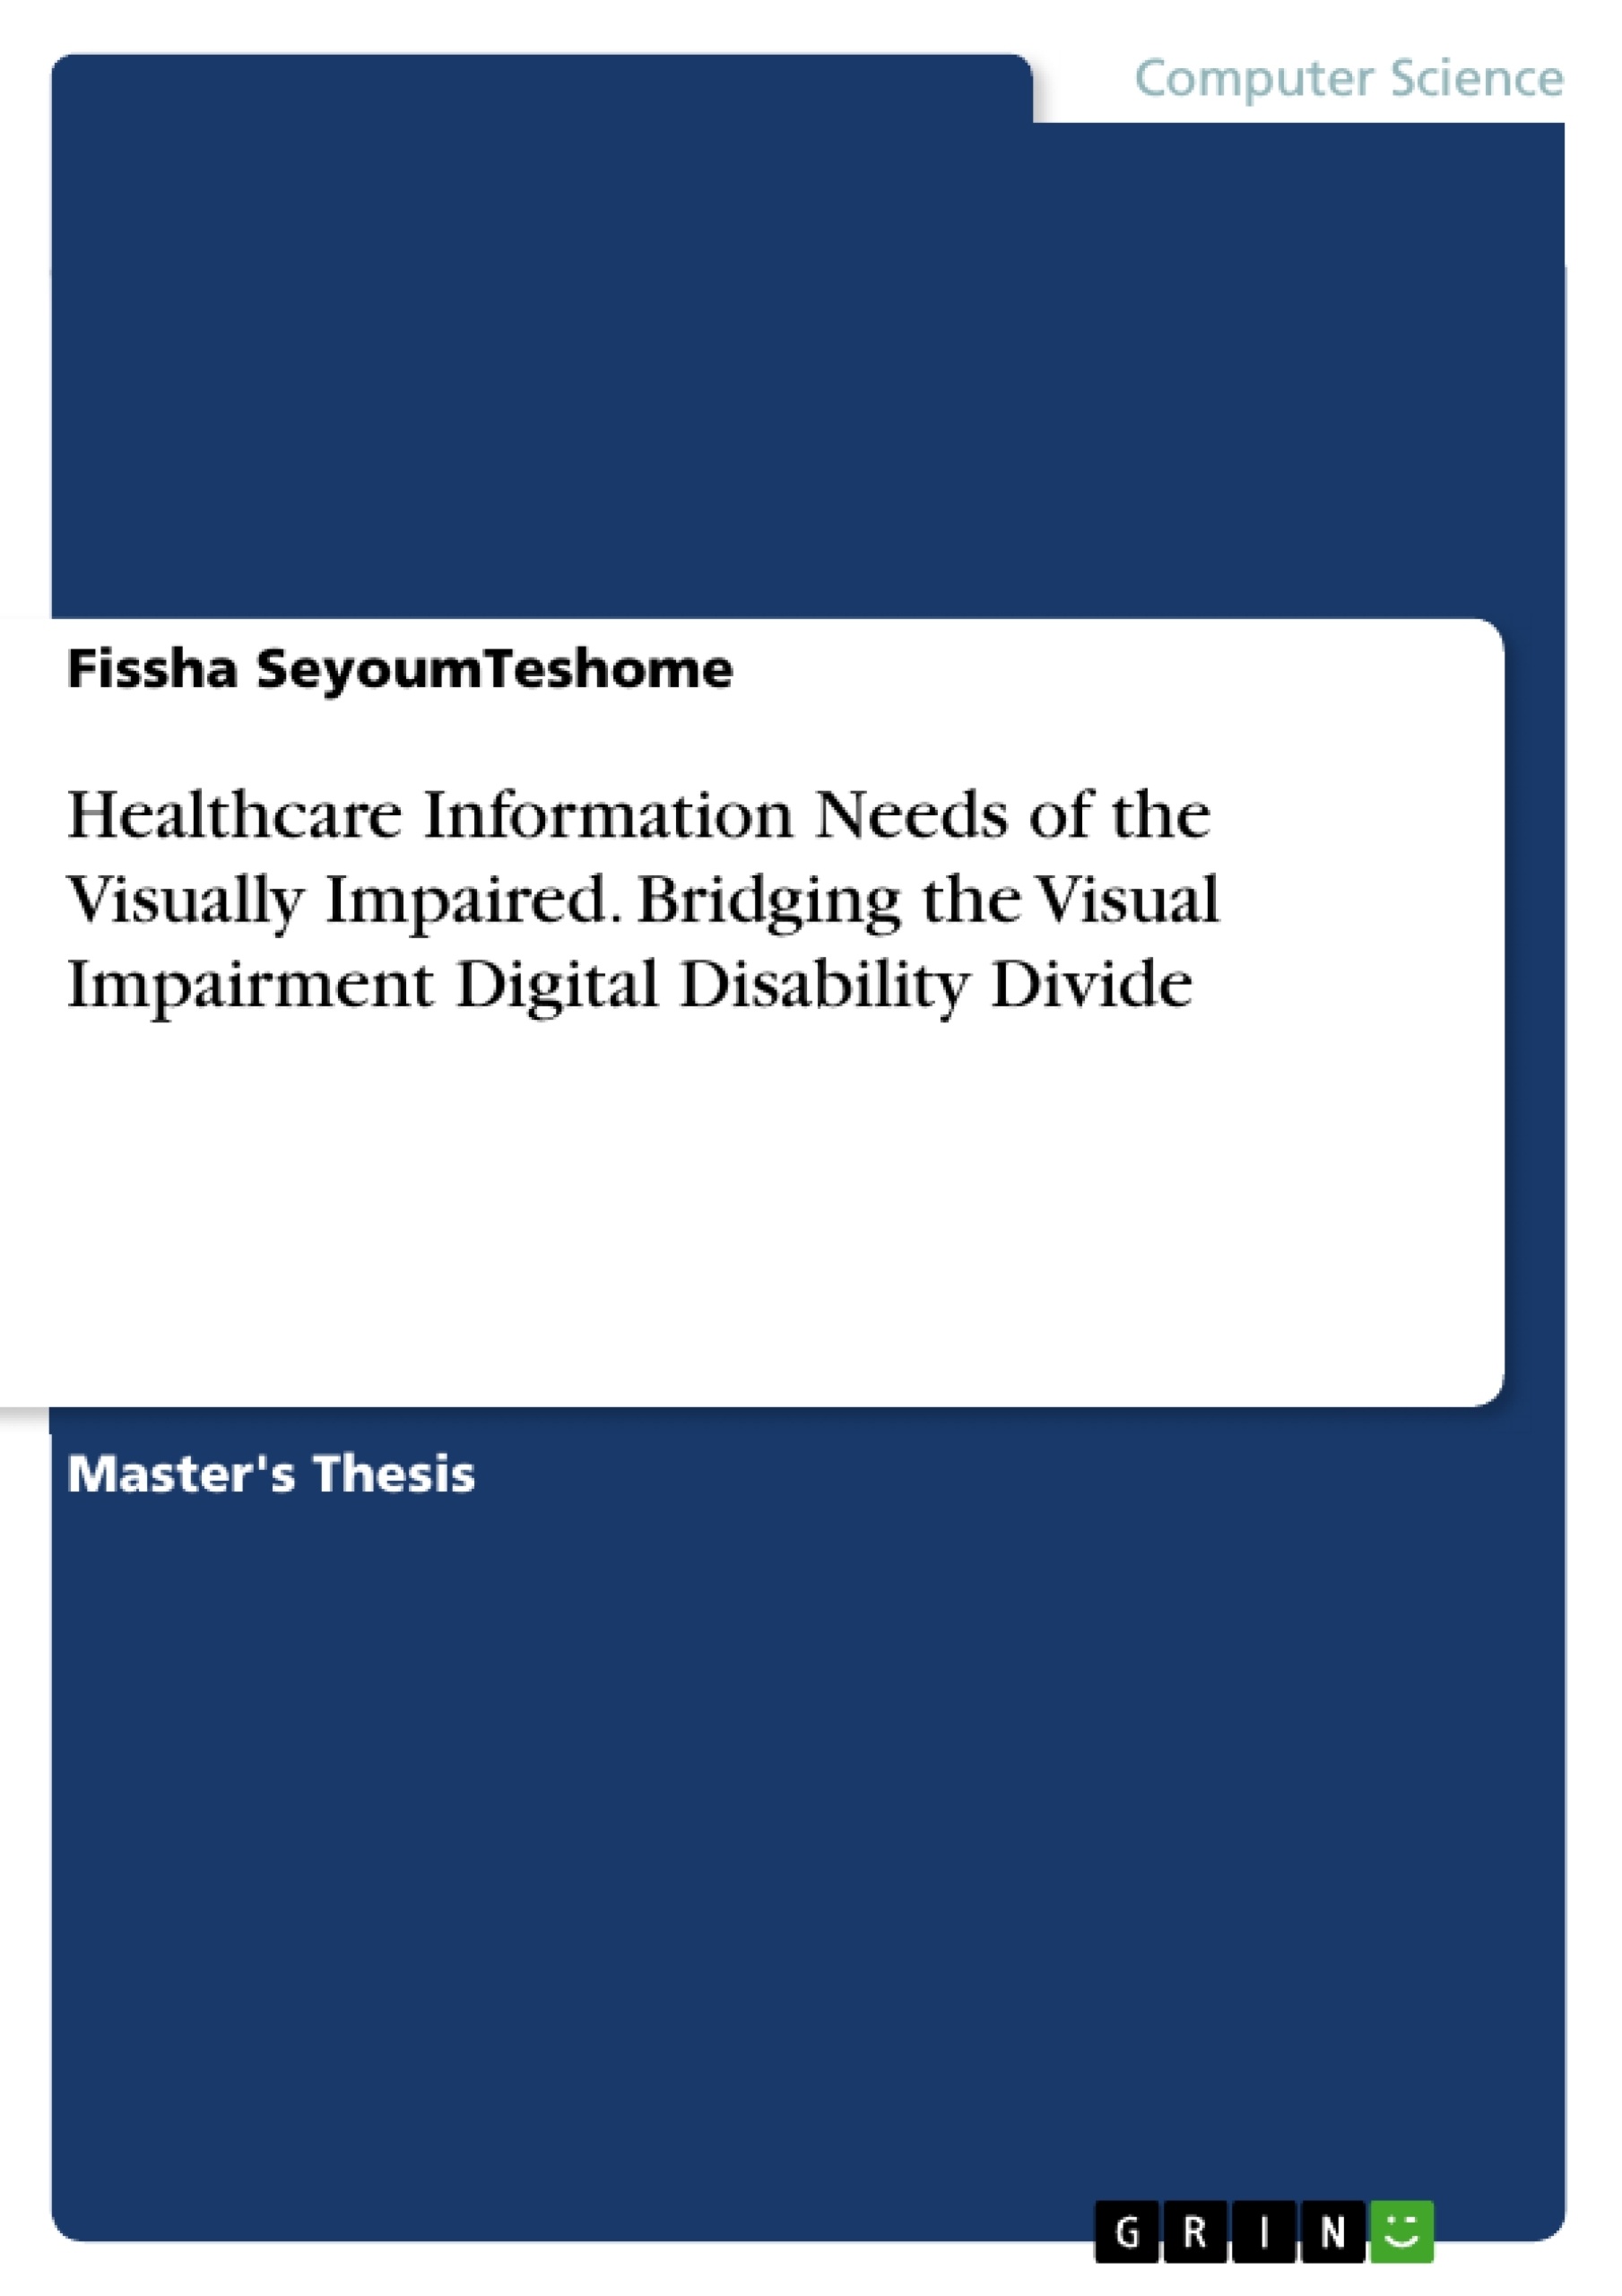 Titre: Healthcare Information Needs of the Visually Impaired. Bridging the Visual Impairment Digital Disability Divide